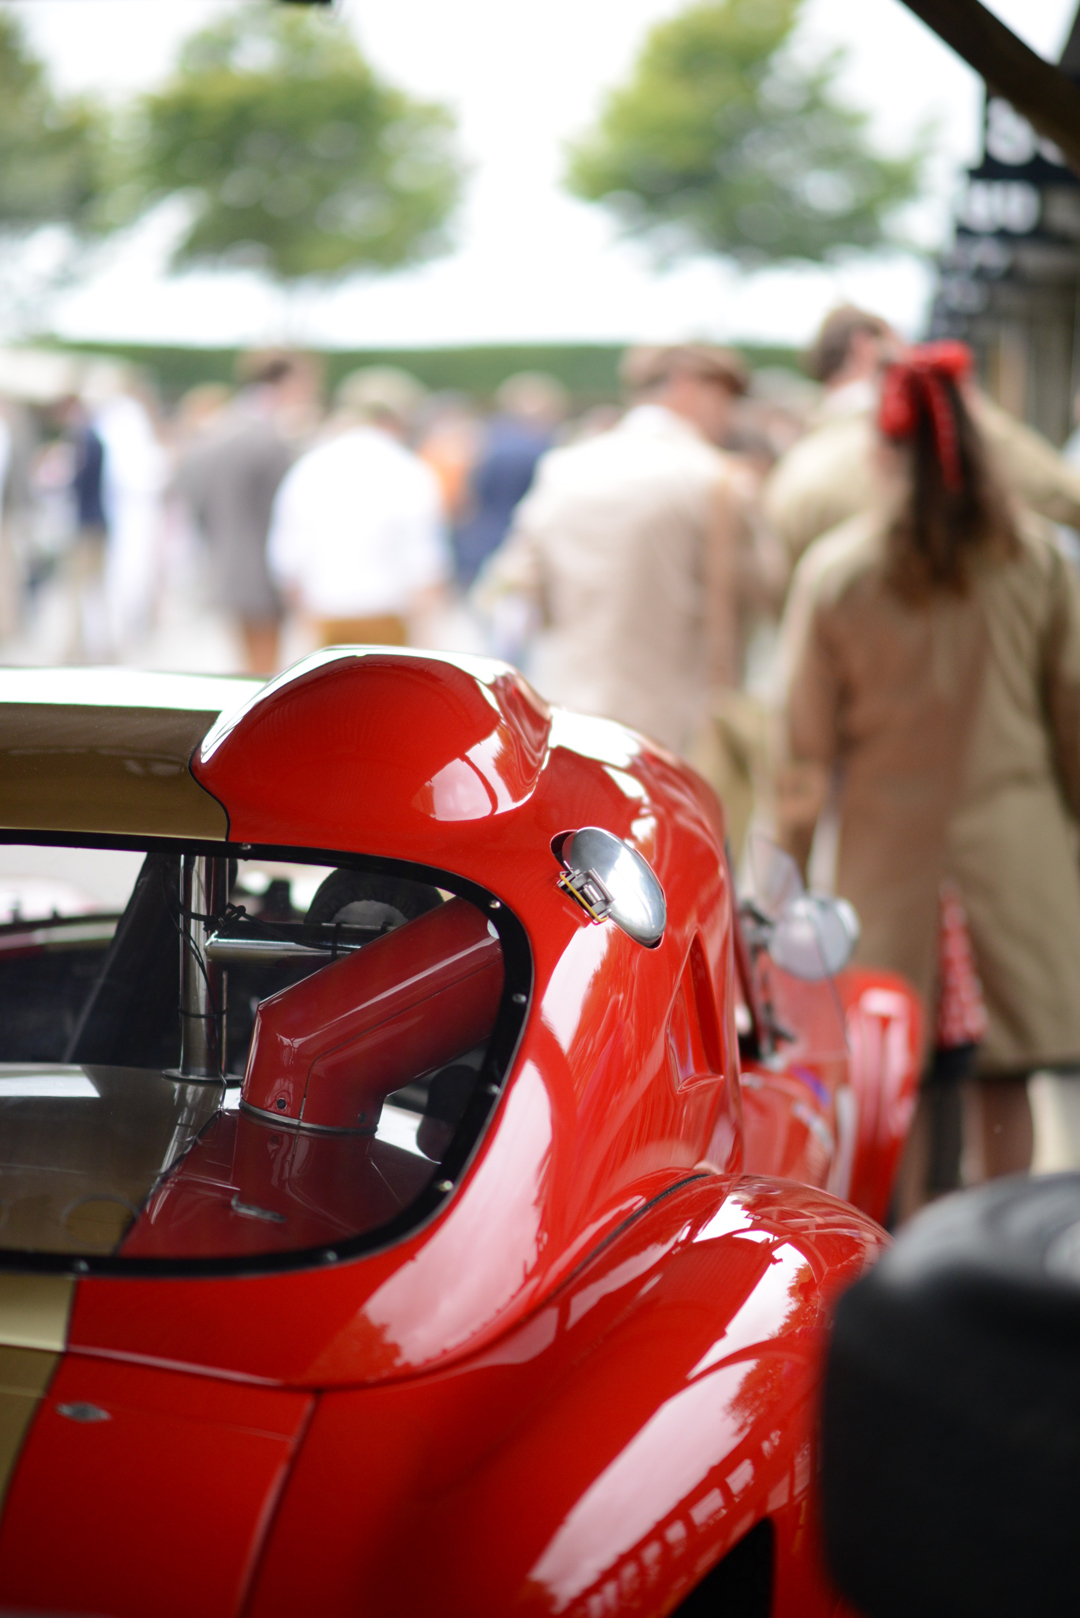 goodwood revival 2016 classic car photograph by sara delaney